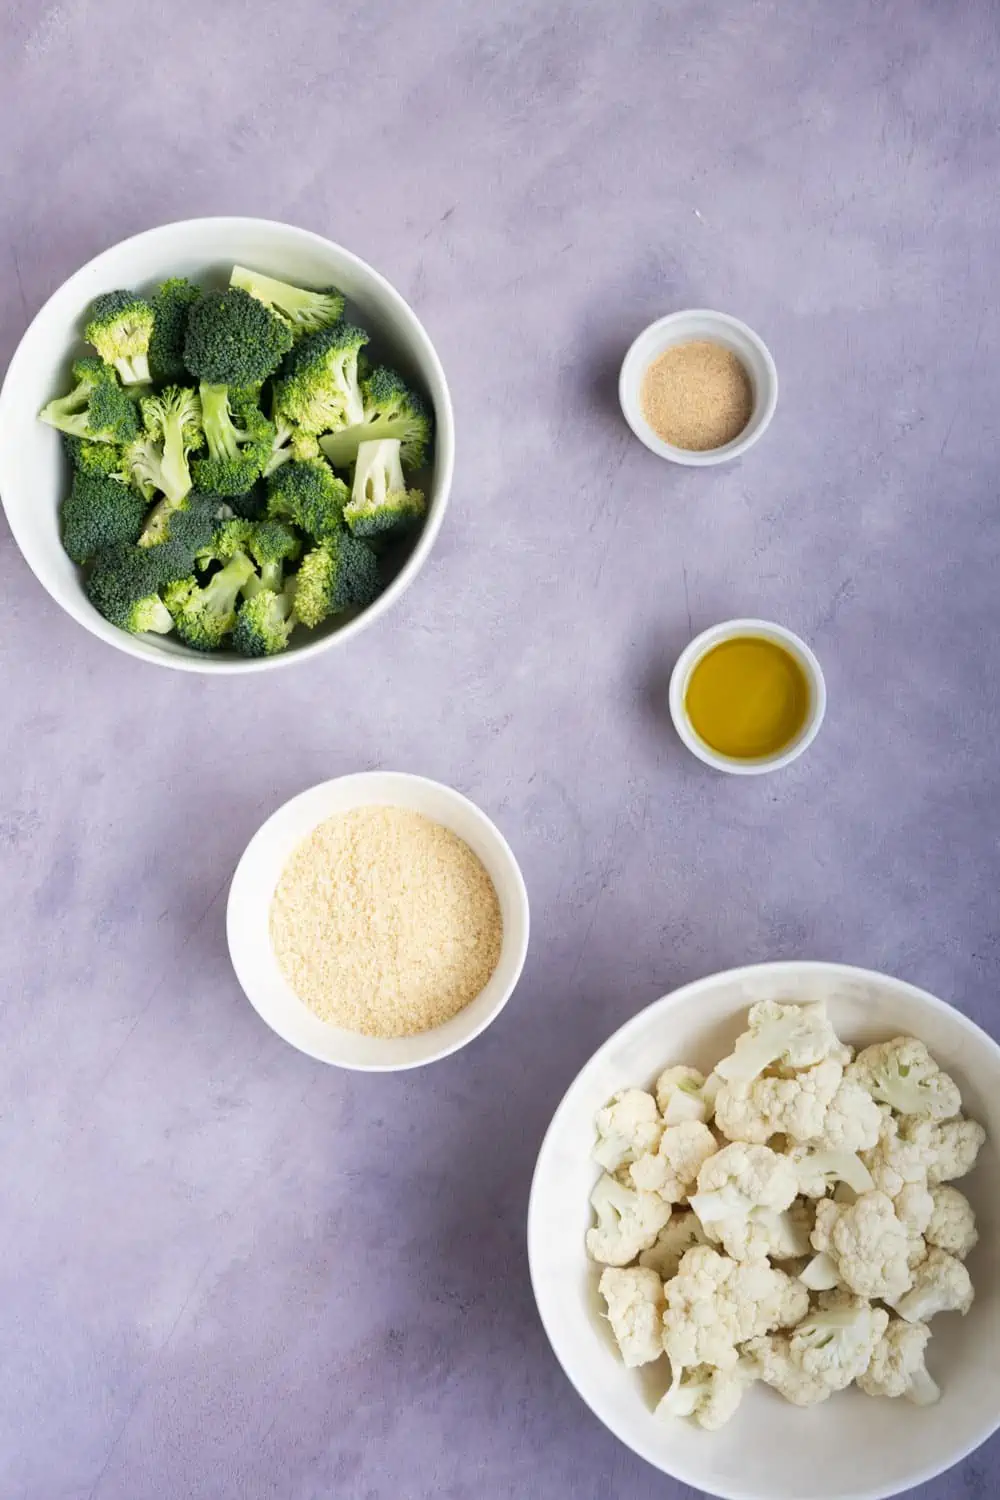 Ingredients to make broccoli and cauliflower with parmesan cheese.